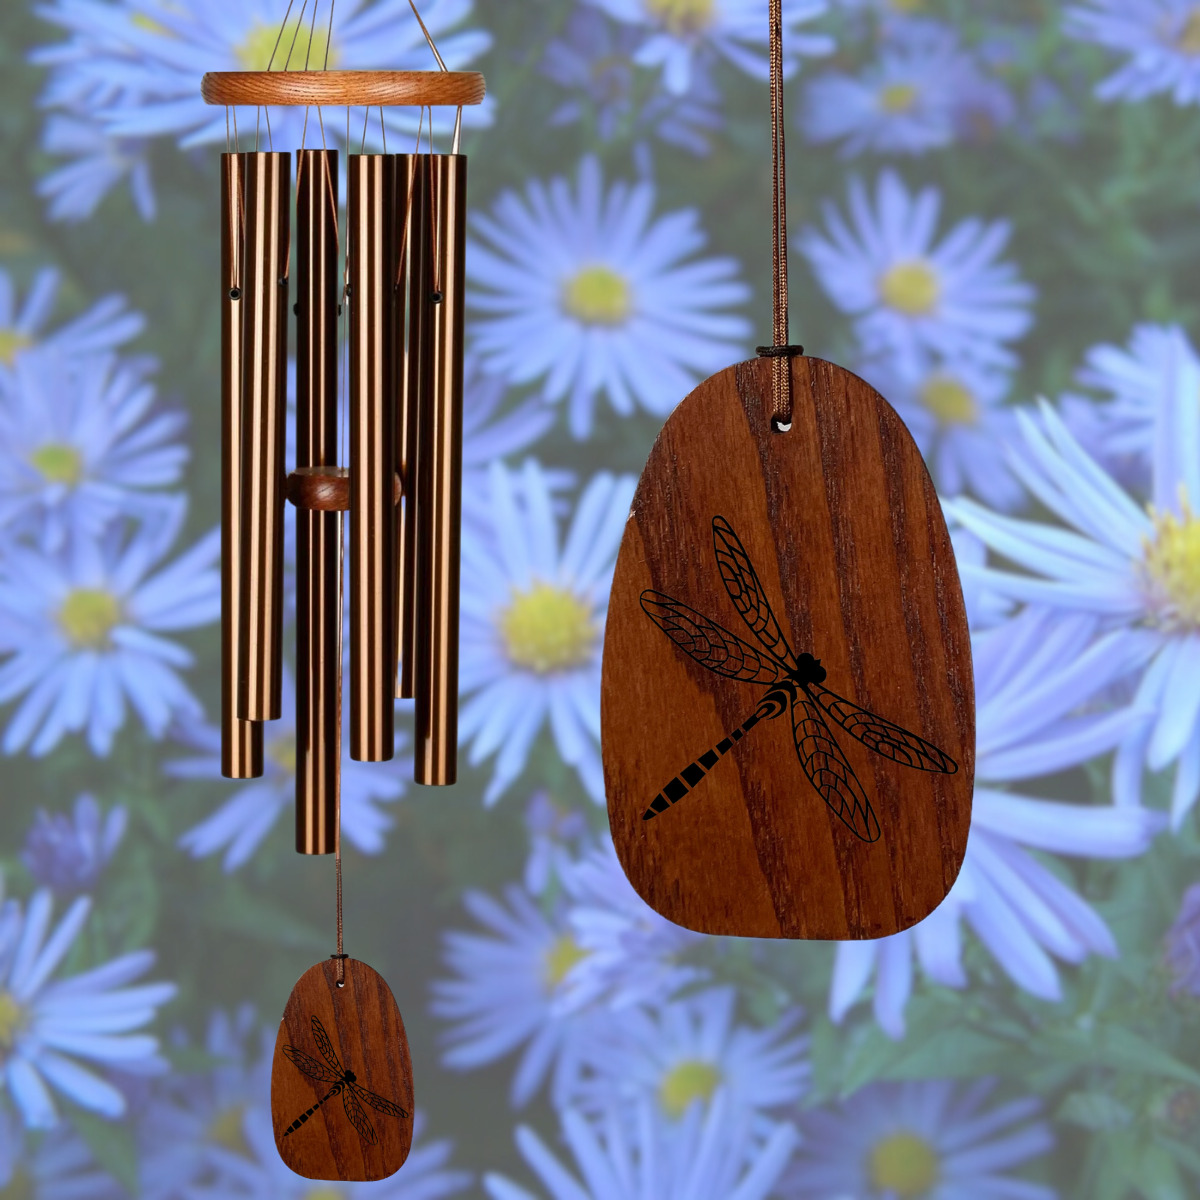 Amazing Grace 25 Inch Wind Chime - Engravable Dragonfly Sail - Bronze